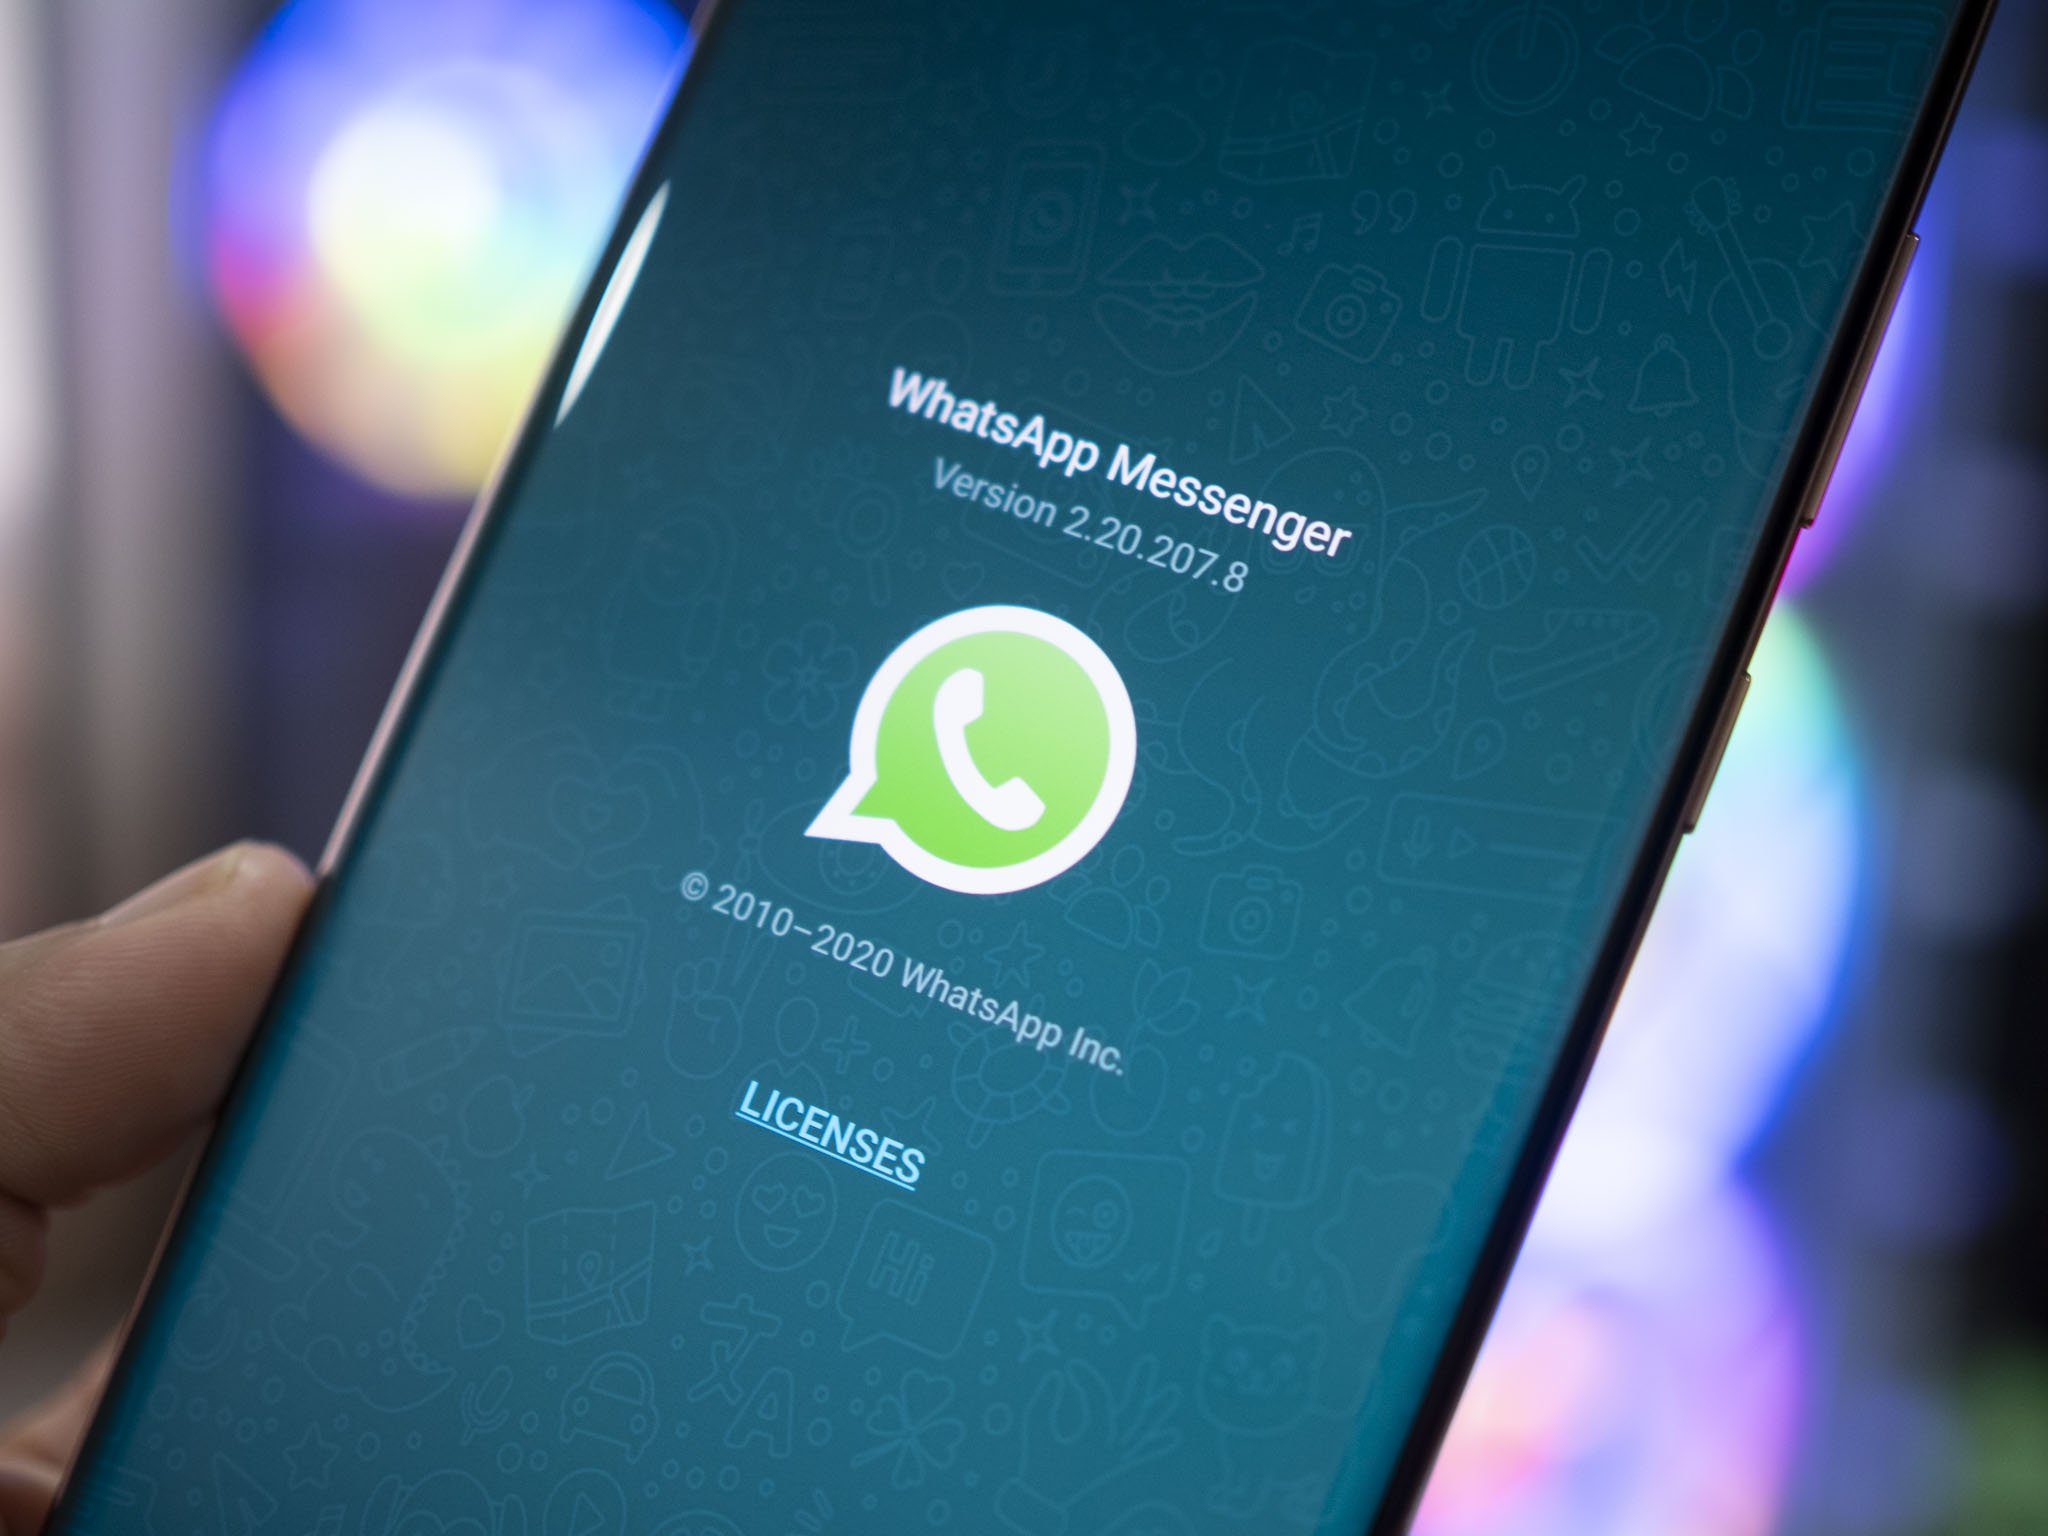 whatsapp-starts-testing-new-voice-call-ui-design-on-iphone-and-android-devices